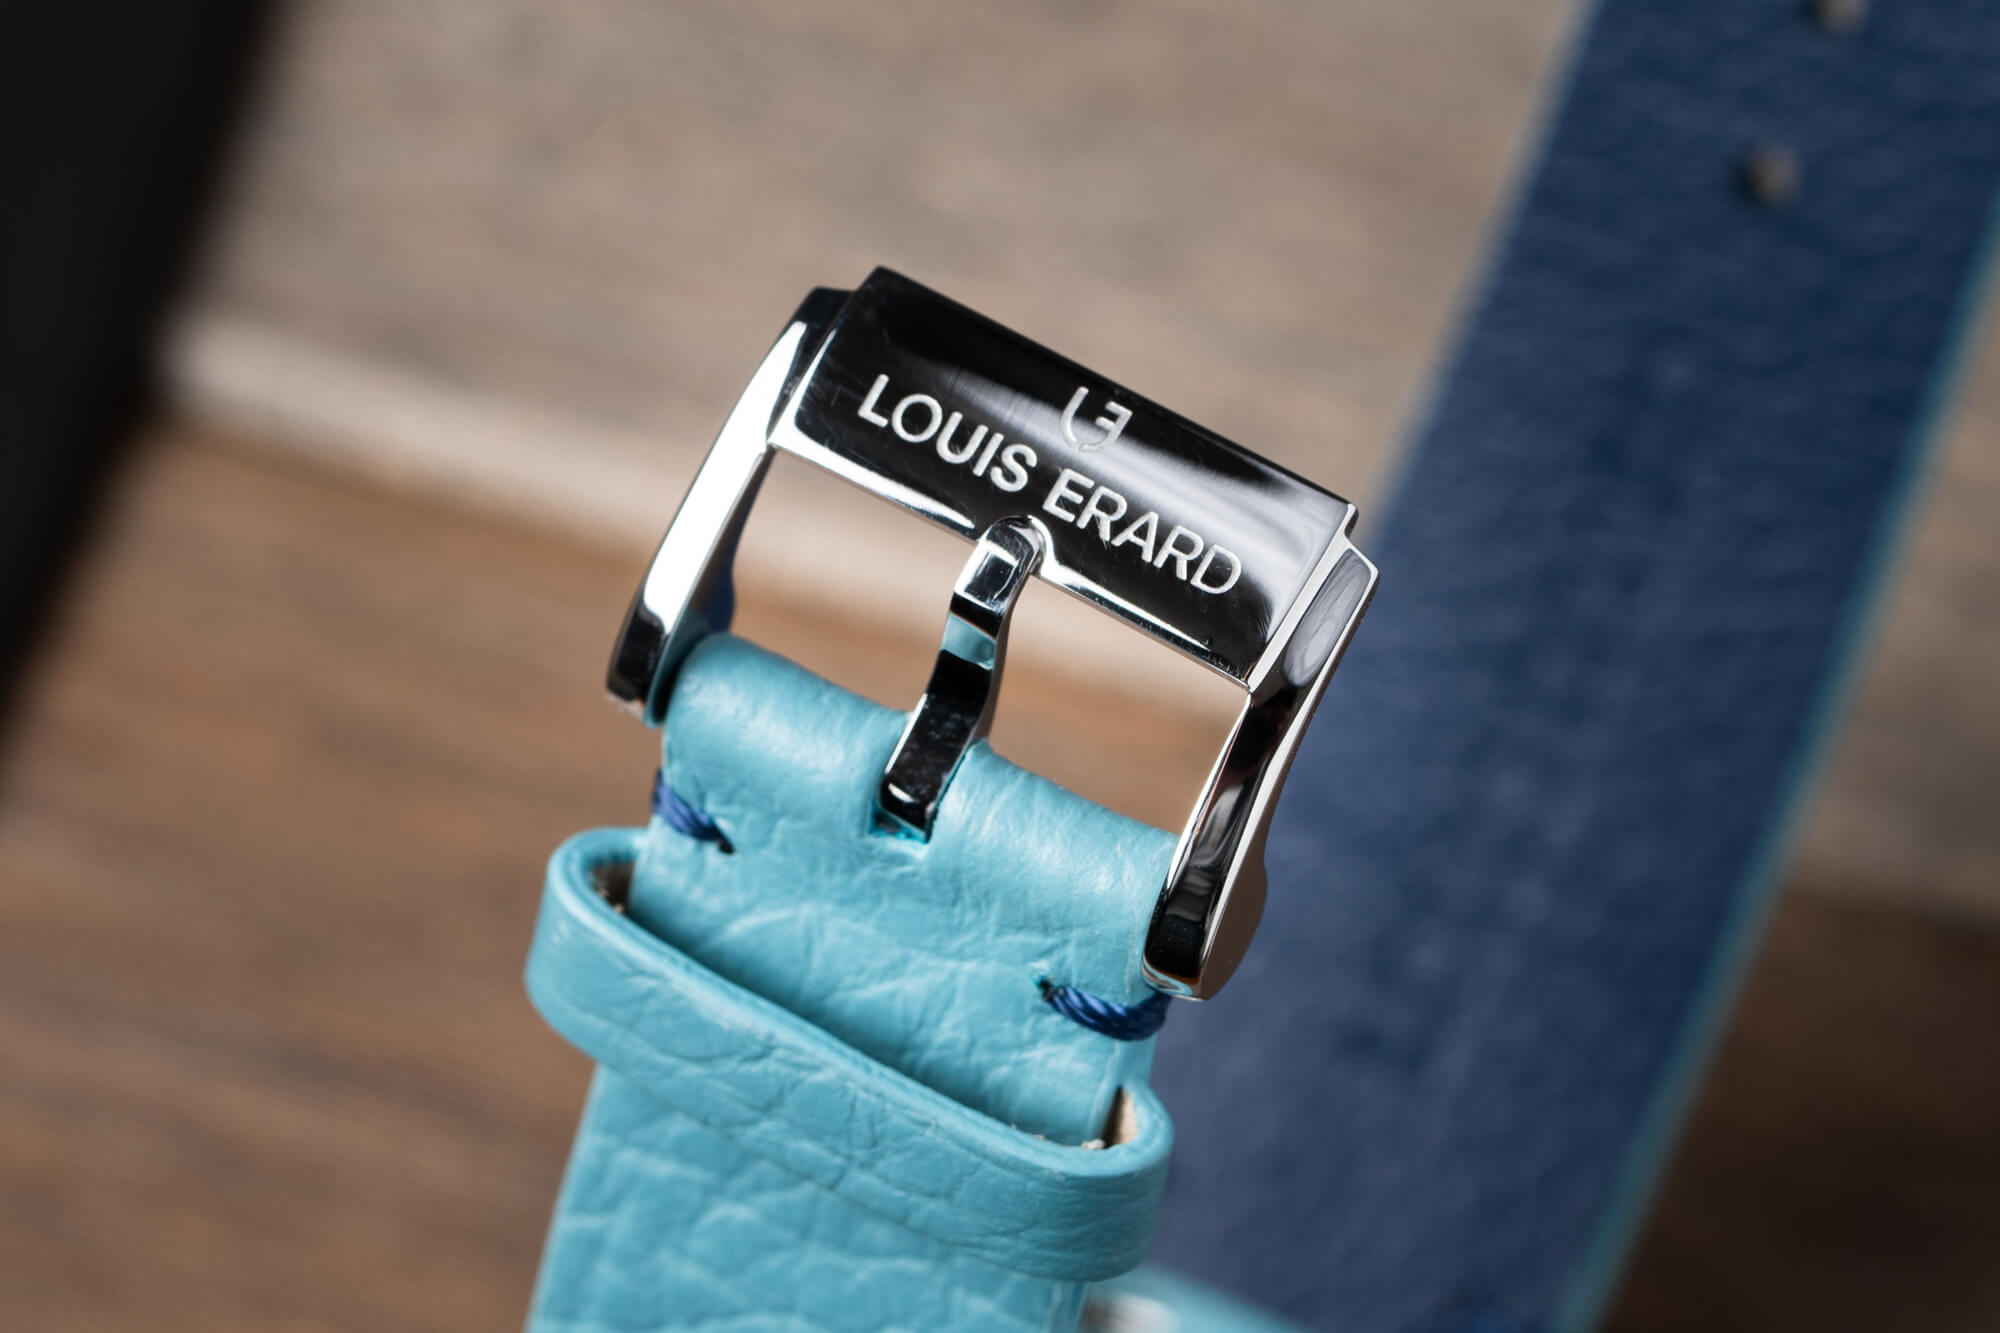 The Louis Erard Excellence Petite Seconde Watch Shines With Vibrant Colors - aBlogtoWatch